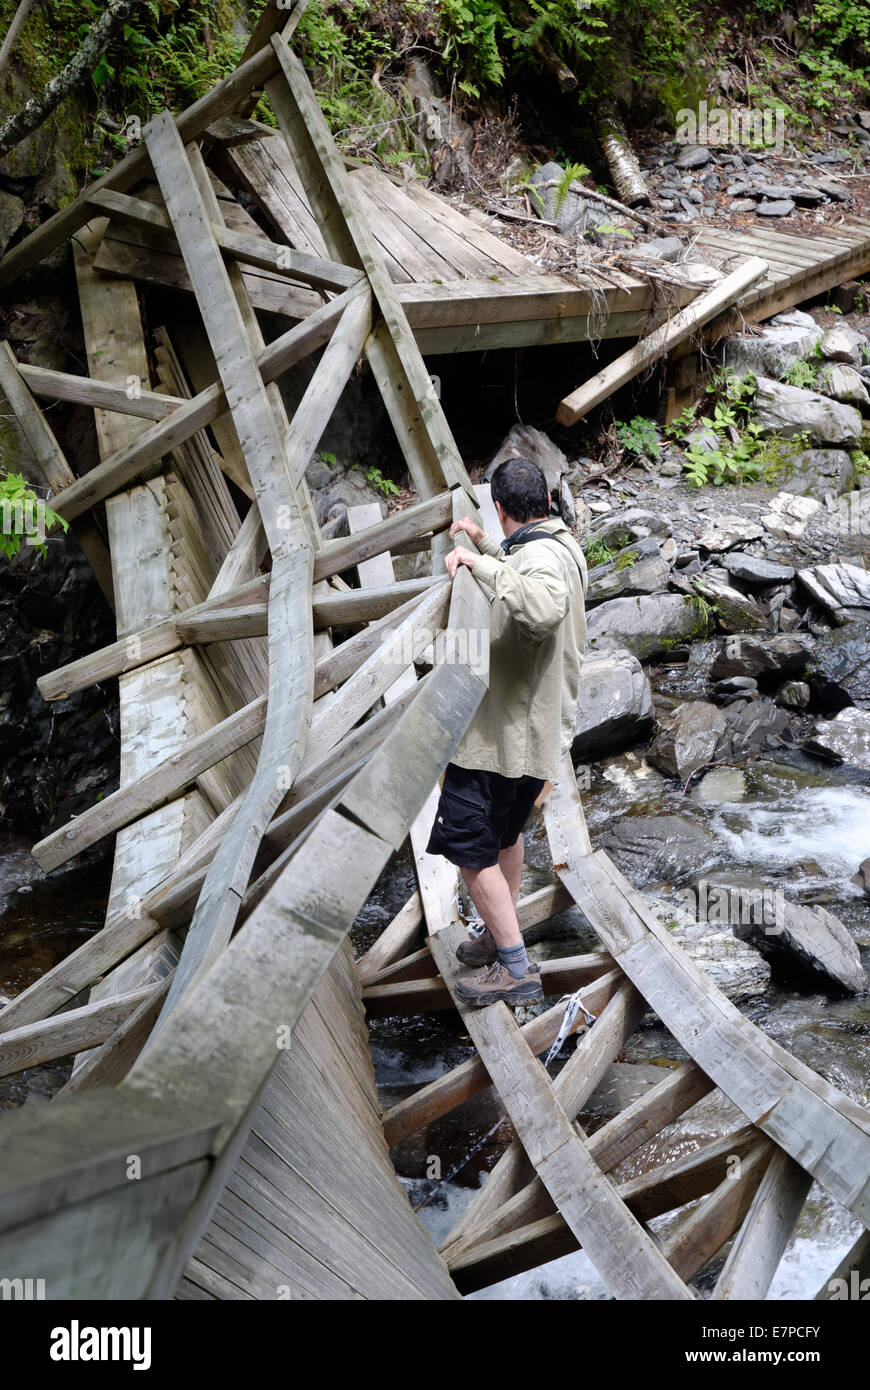 A man crossing a wooden bridge destroyed by floodwater in the river, Gaspesie, Quebec, Canada Stock Photo